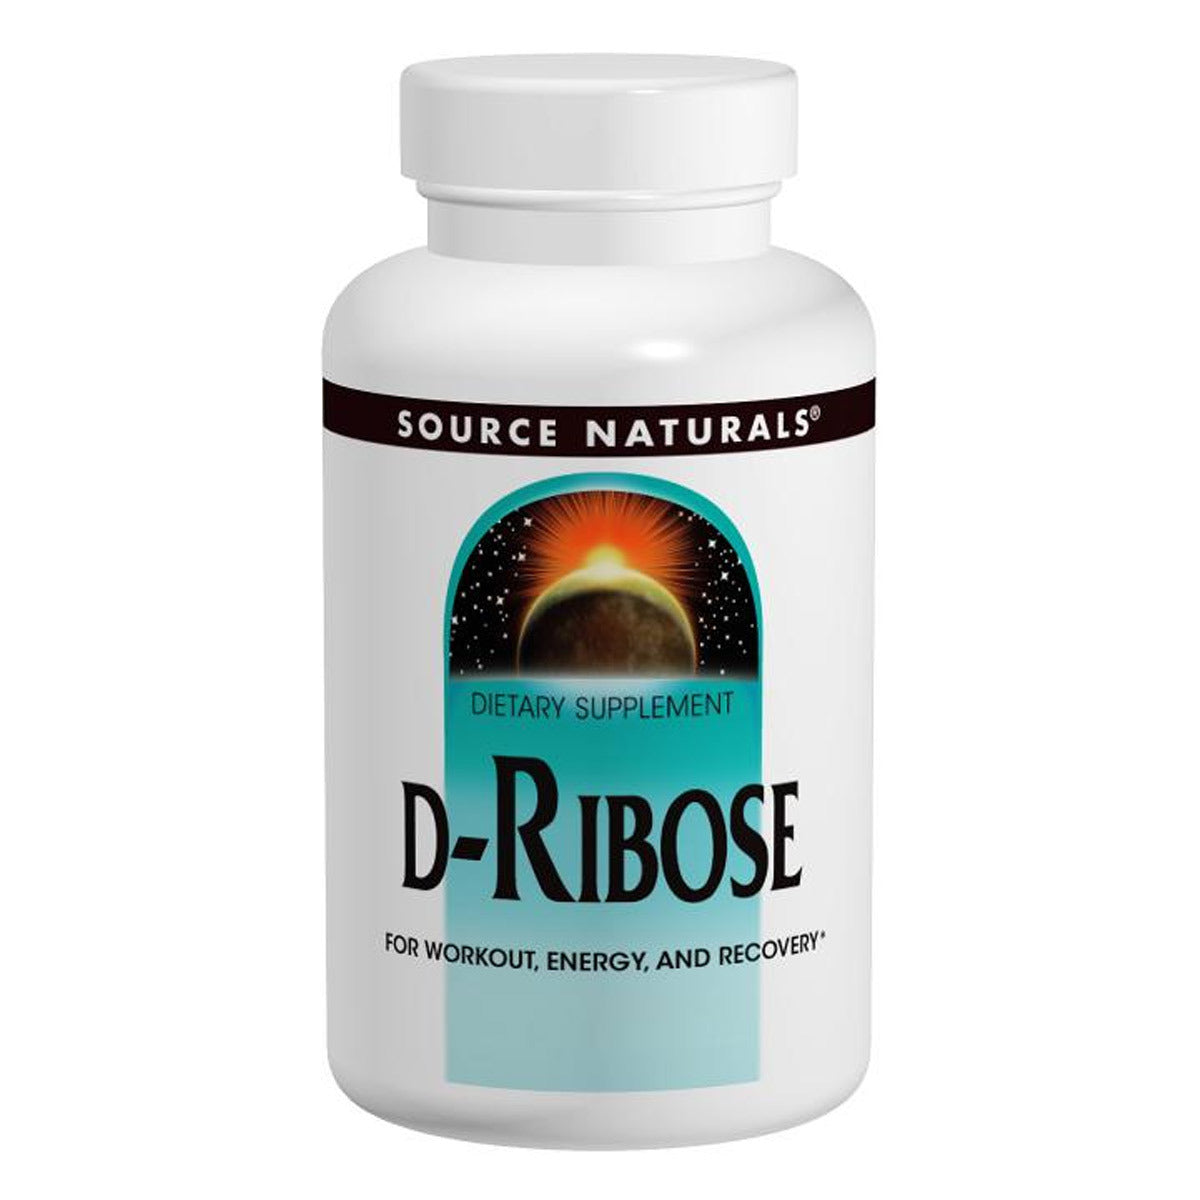 Primary image of D-Ribose Chewable Tablets